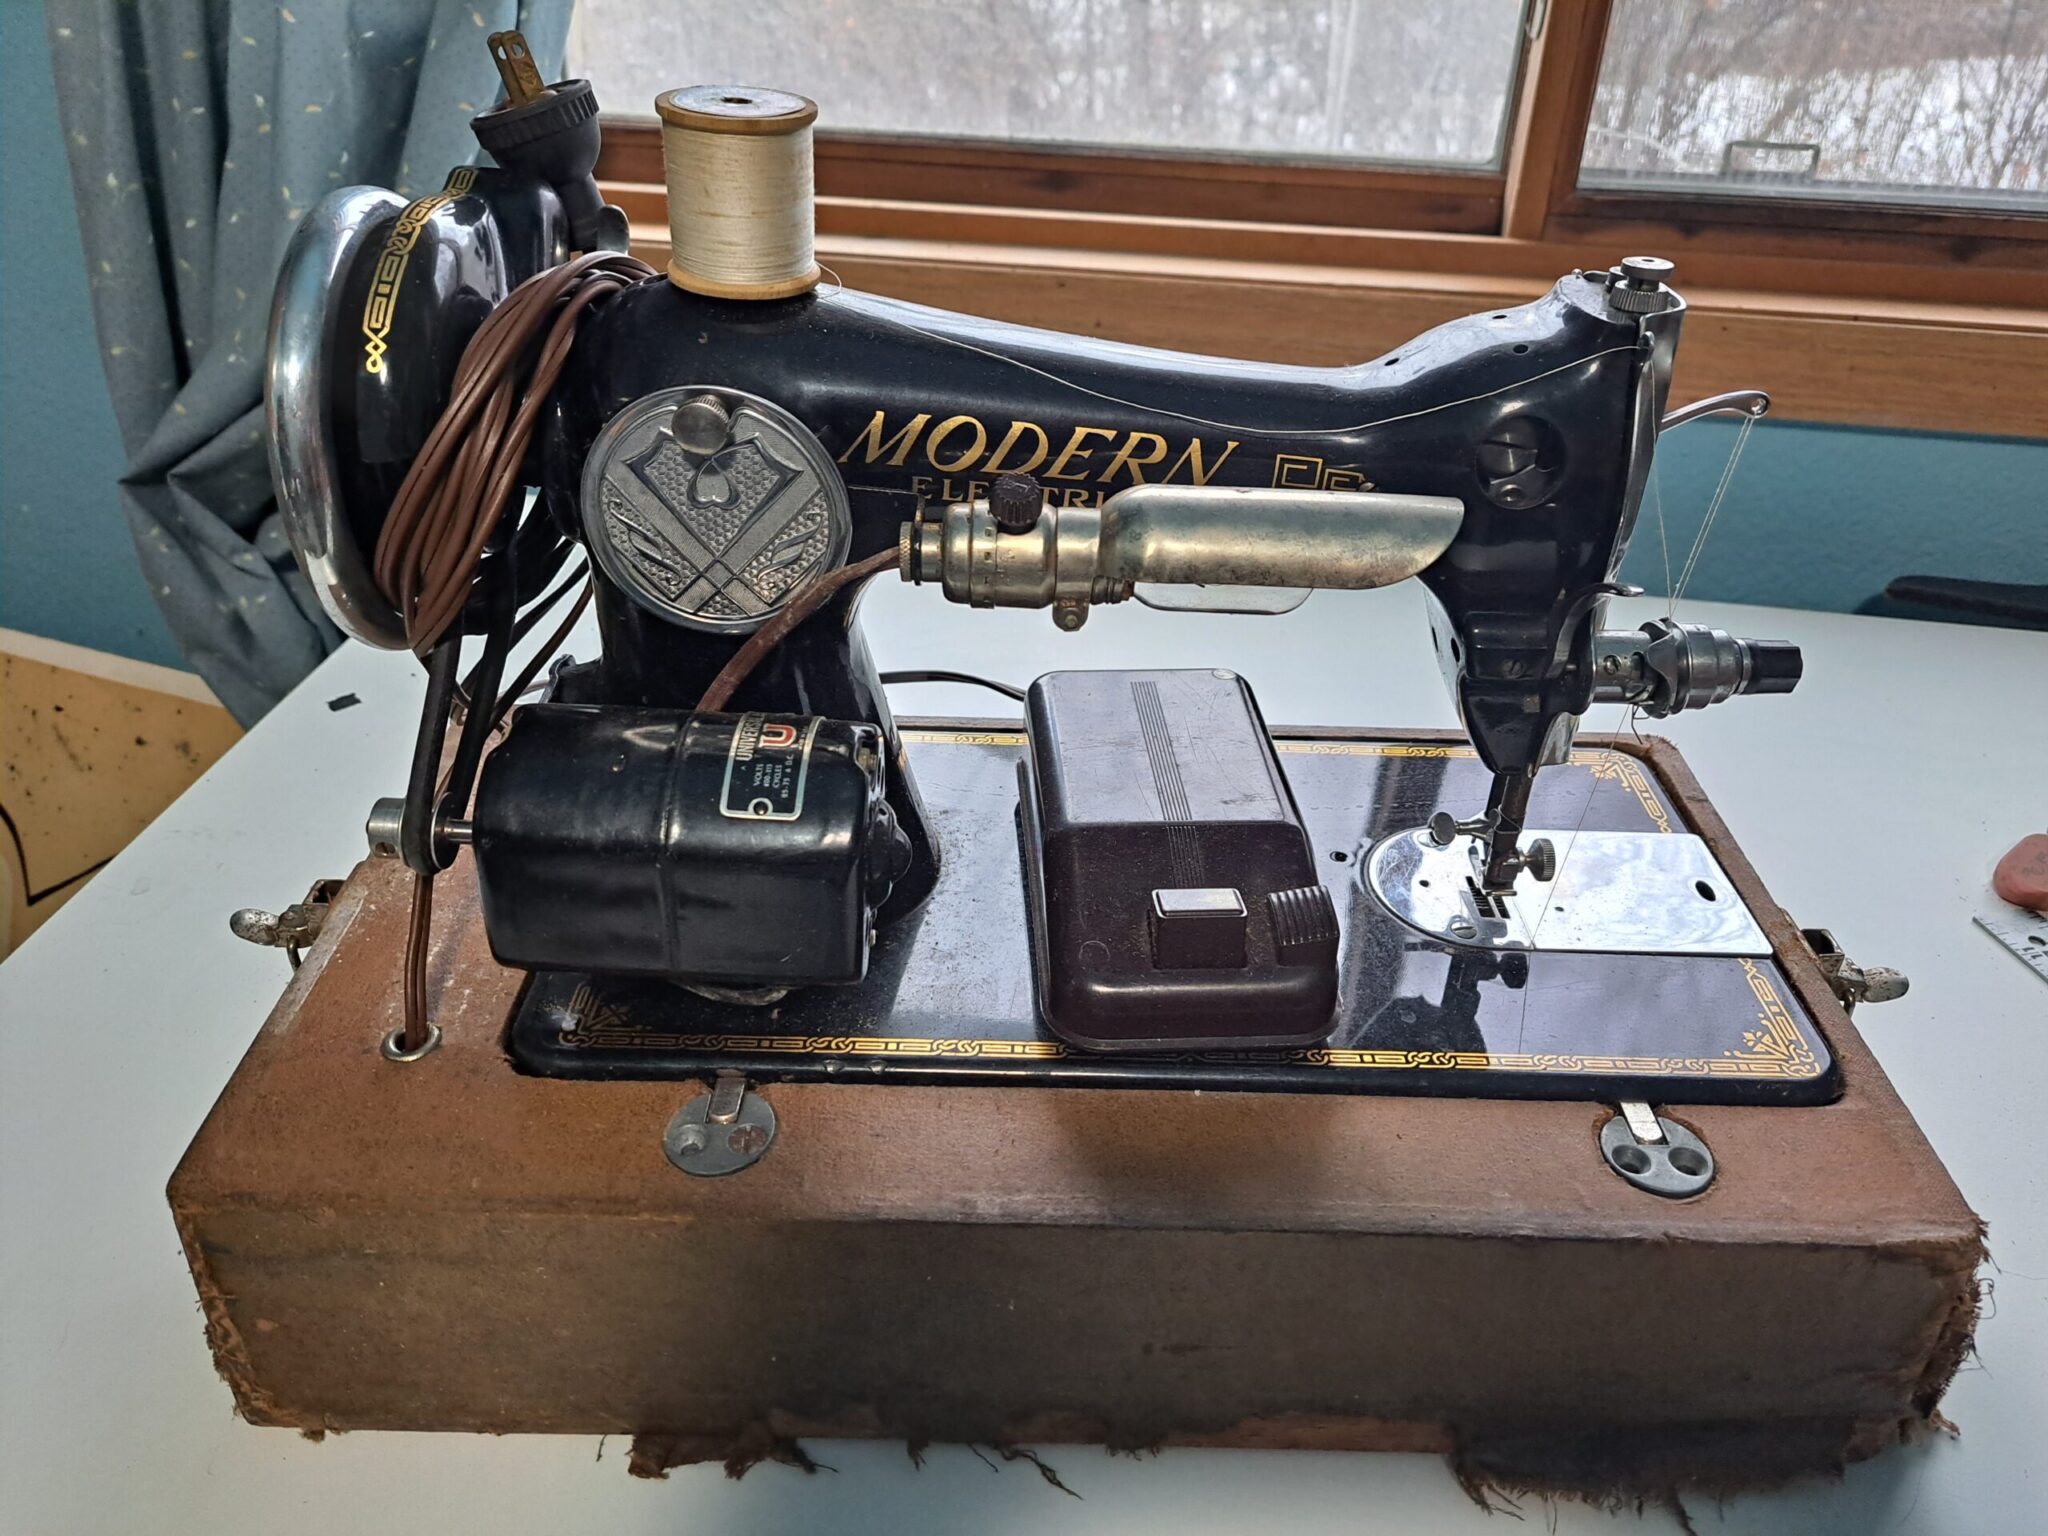 Vintage MODERN ELECTRIC Sewing Machine. Beautiful and Ornate - The Life and  Times of Gene G. Check